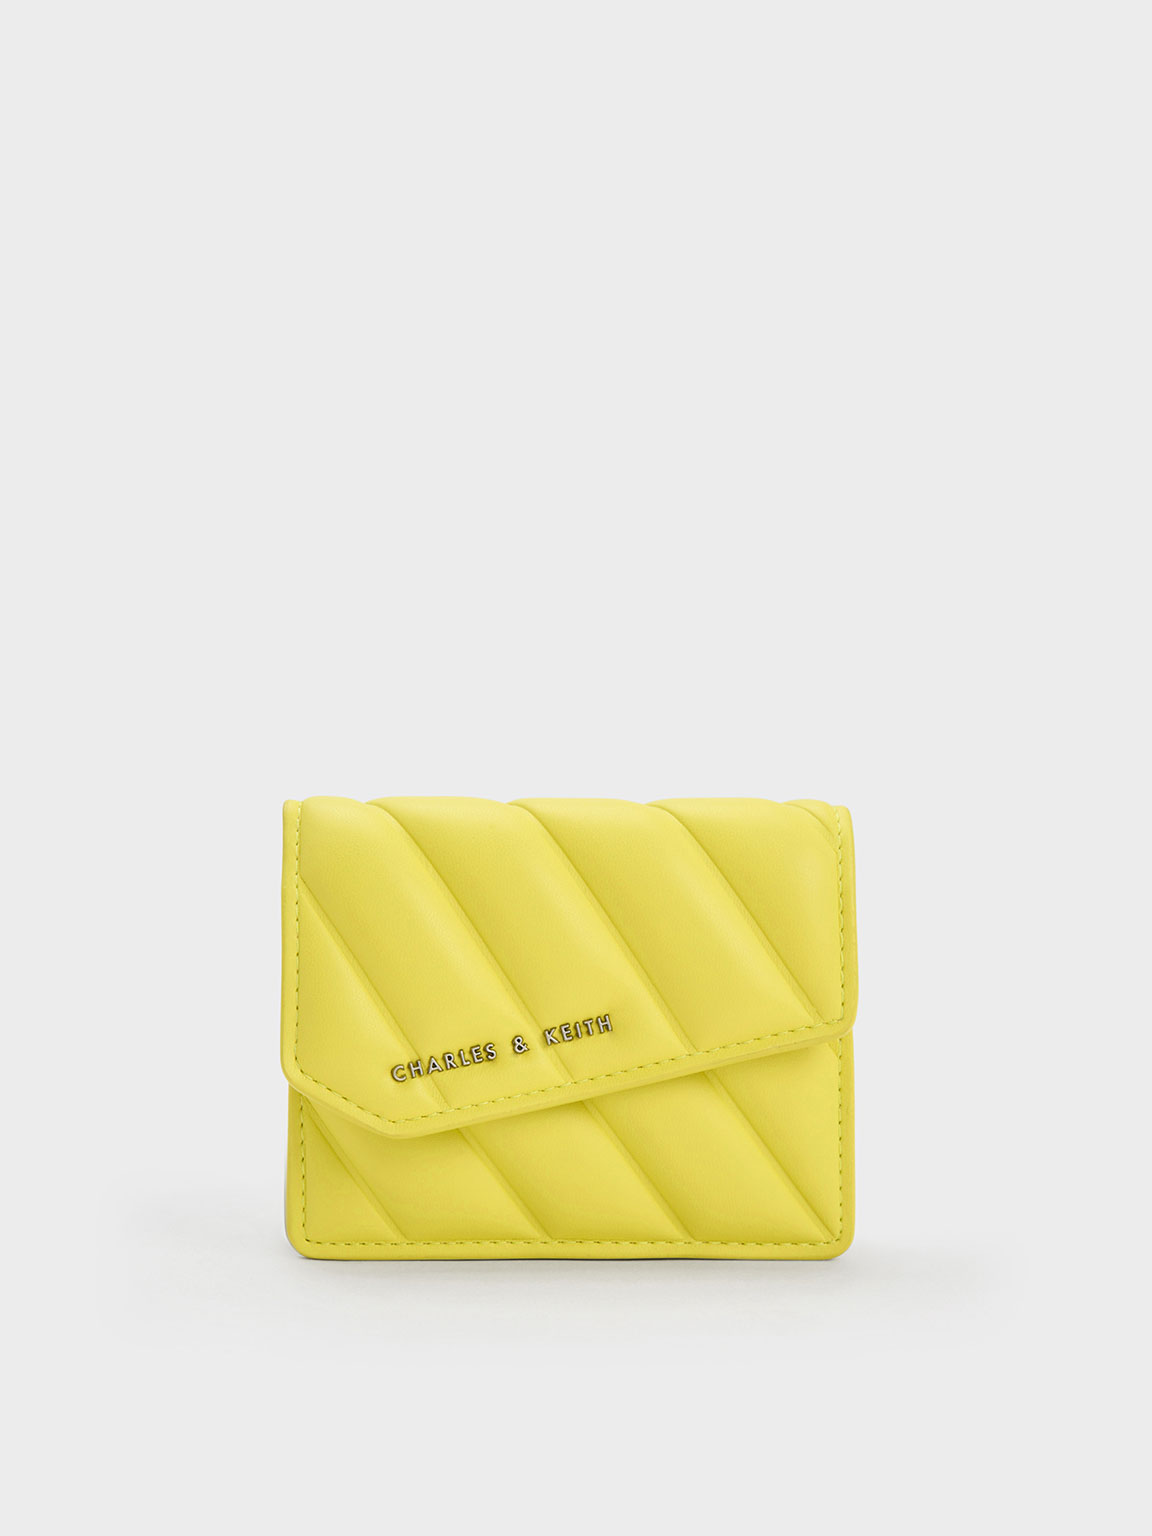 Yellow Asymmetric Flap Panelled Wallet - CHARLES & KEITH TH